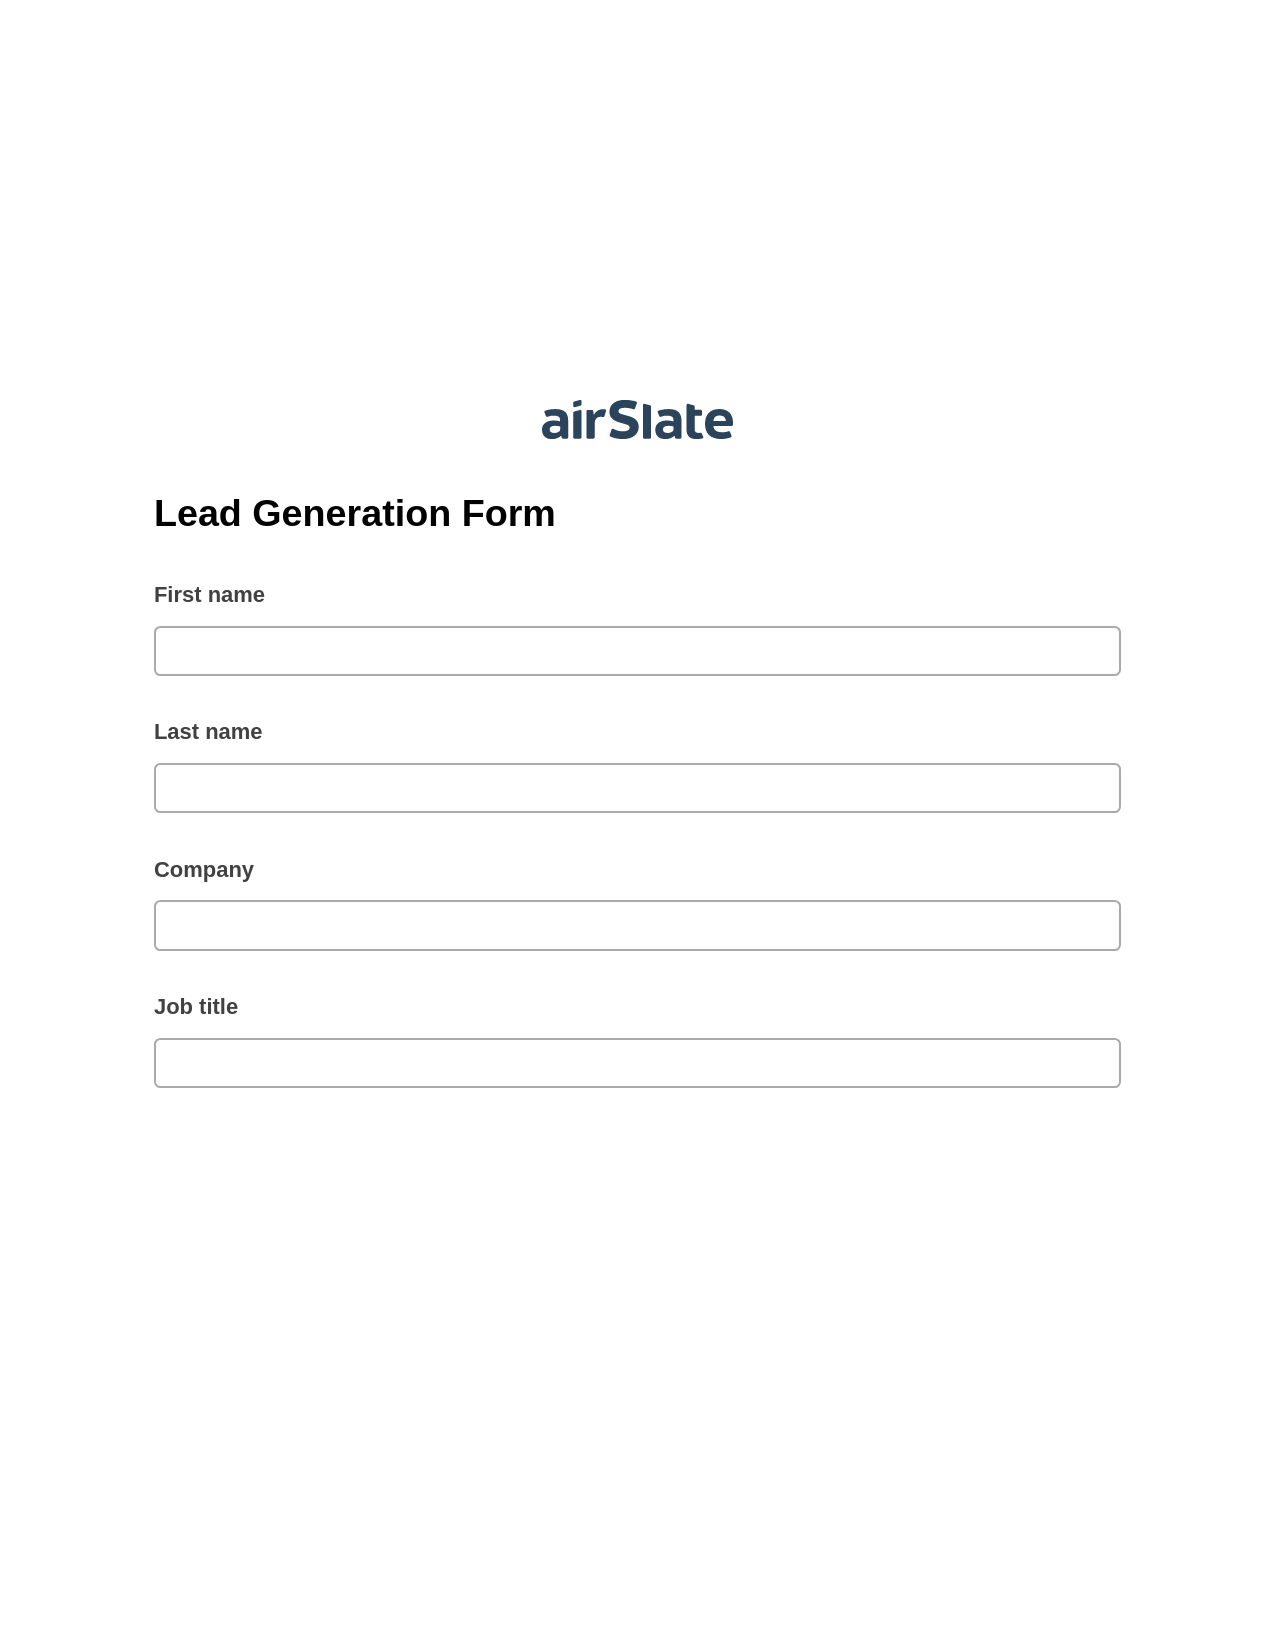 Lead Generation Form Pre-fill Dropdowns from CSV file Bot, Add Tags to Slate Bot, Archive to SharePoint Folder Bot